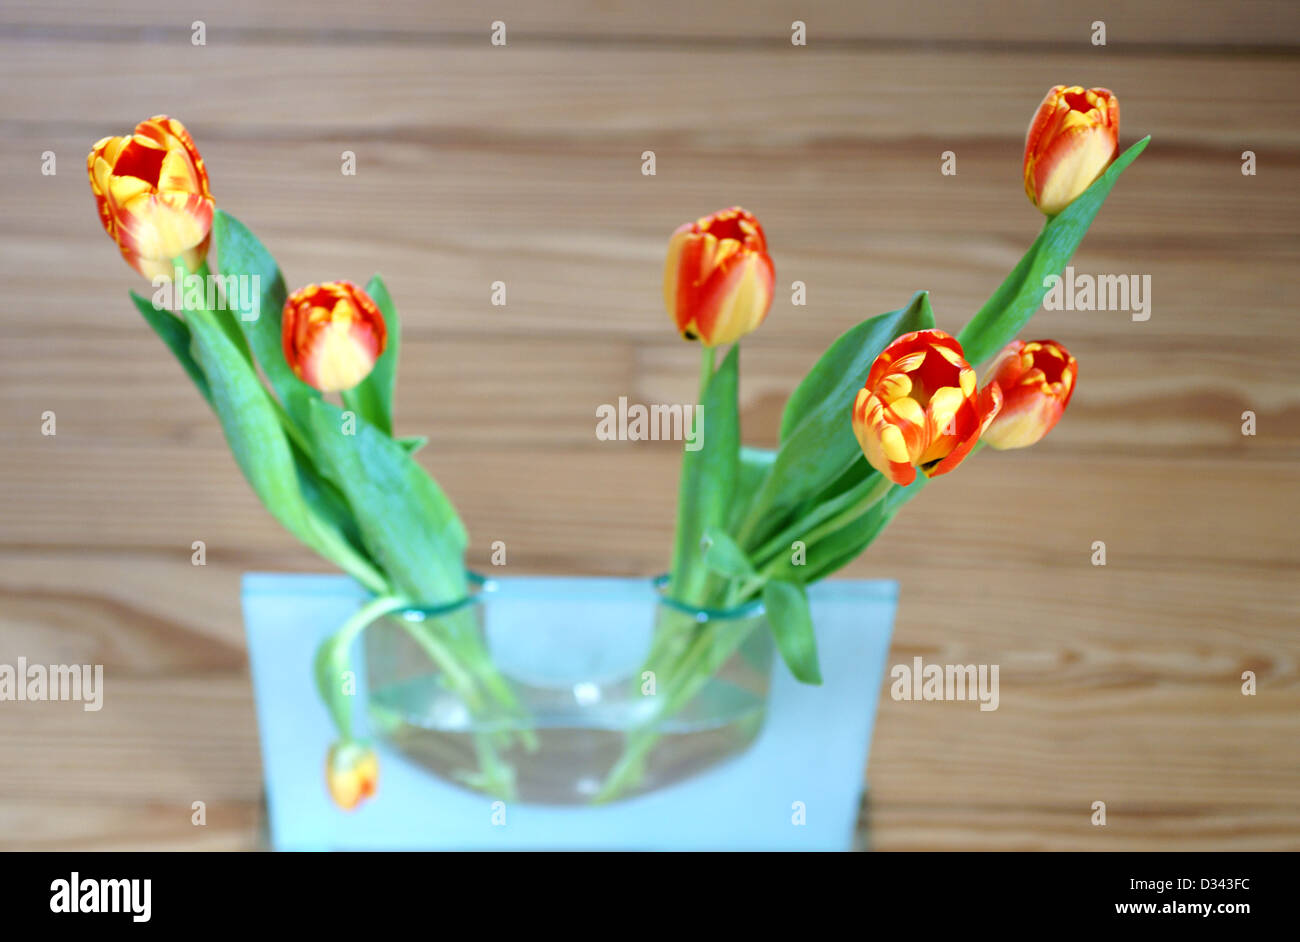 Tulips in a vase Stock Photo